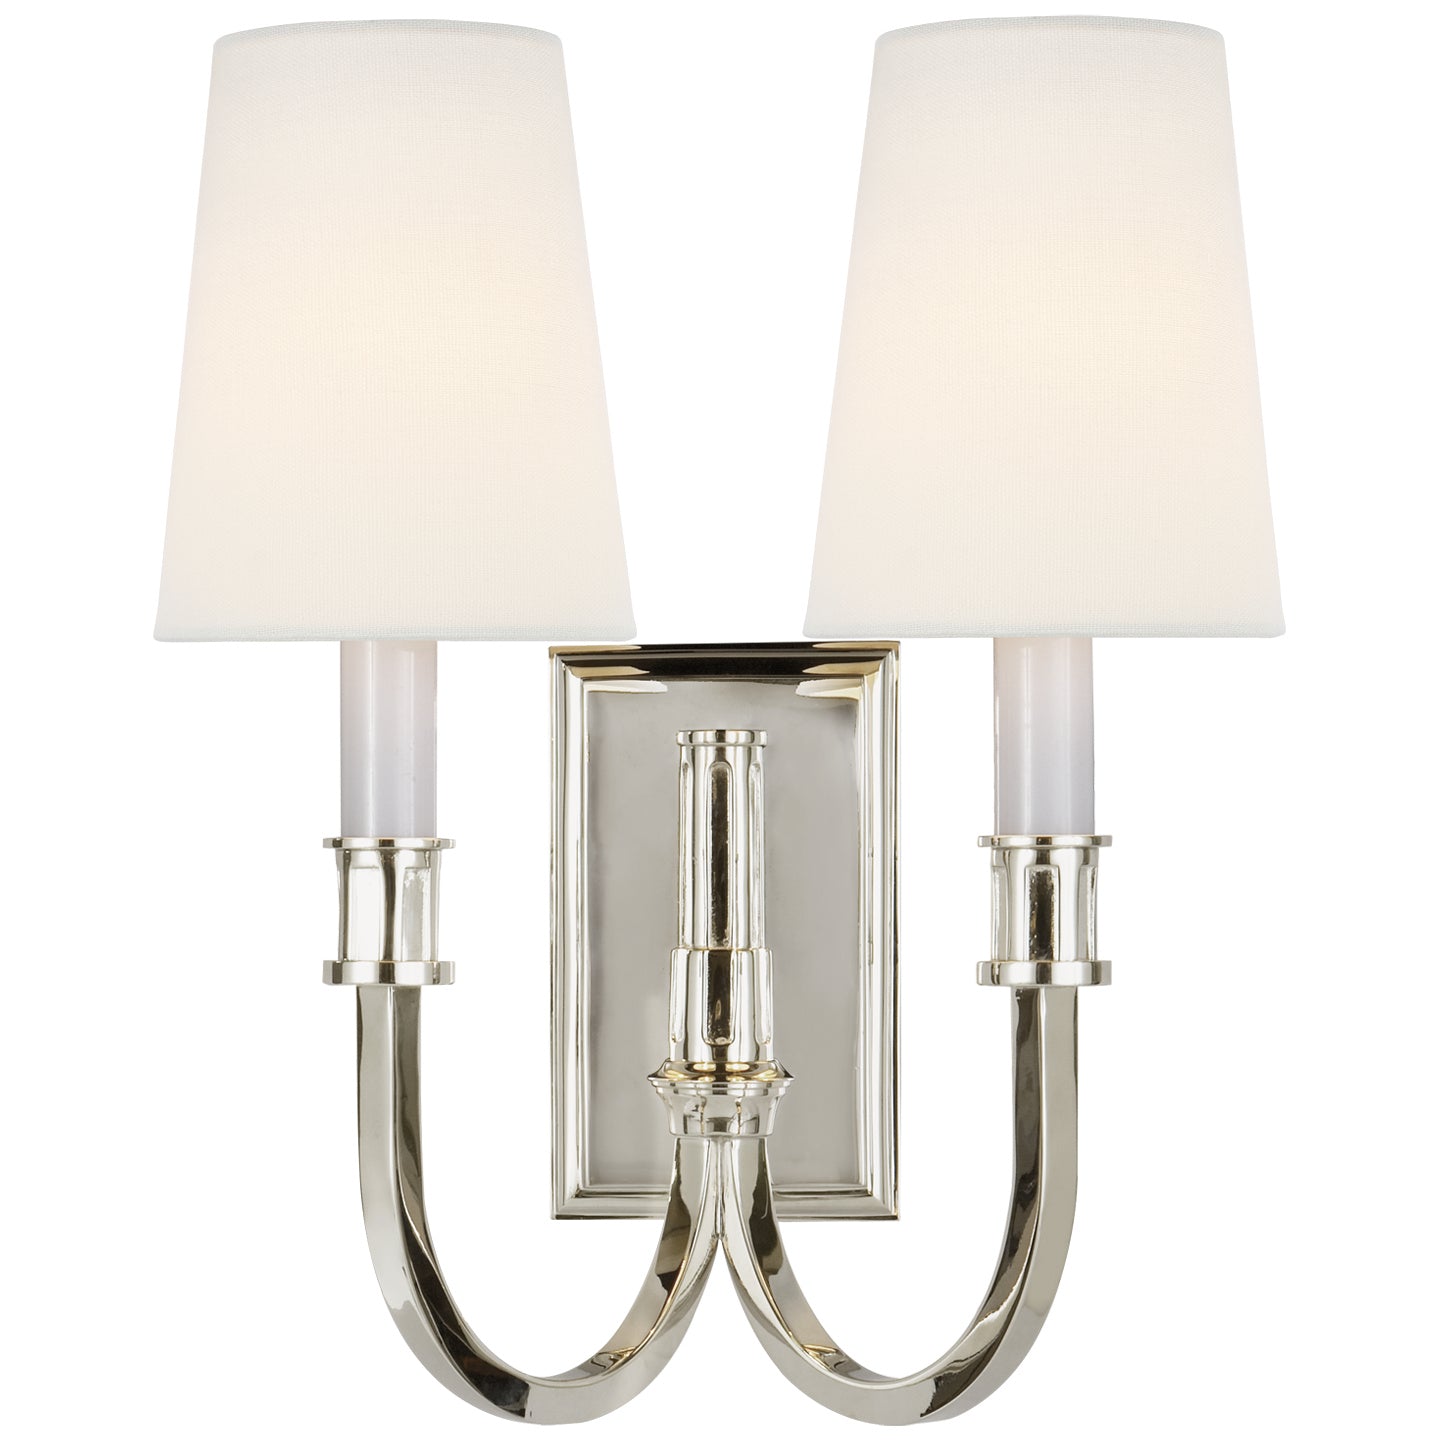 Load image into Gallery viewer, Visual Comfort Signature - TOB 2328PN-L - Two Light Wall Sconce - Modern Library - Polished Nickel
